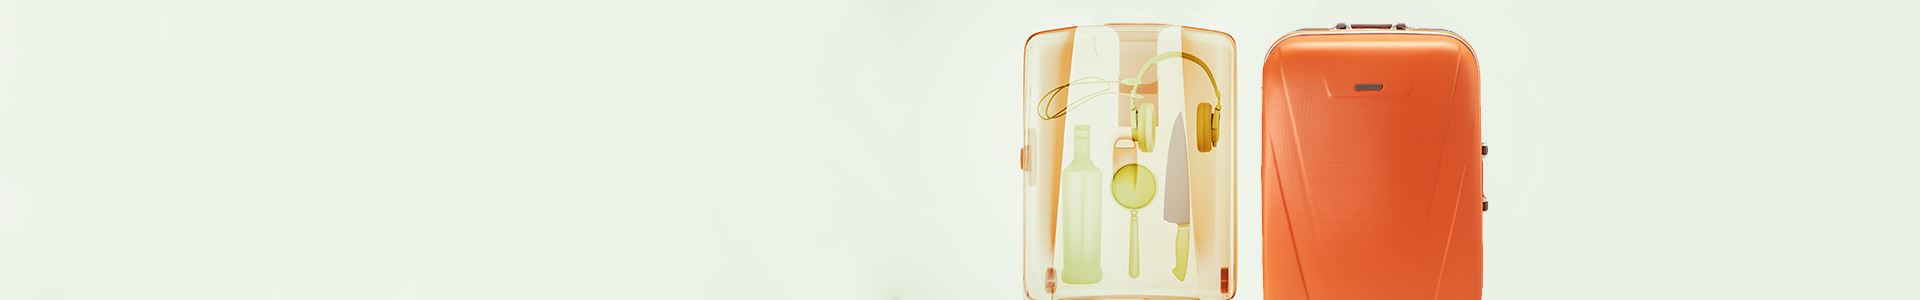 Photo of an orange trolley bag with an X-ray of its interior on the left side. The X-ray shows several items: a knife, a headphone set, a bottle, and a magnifying glass.